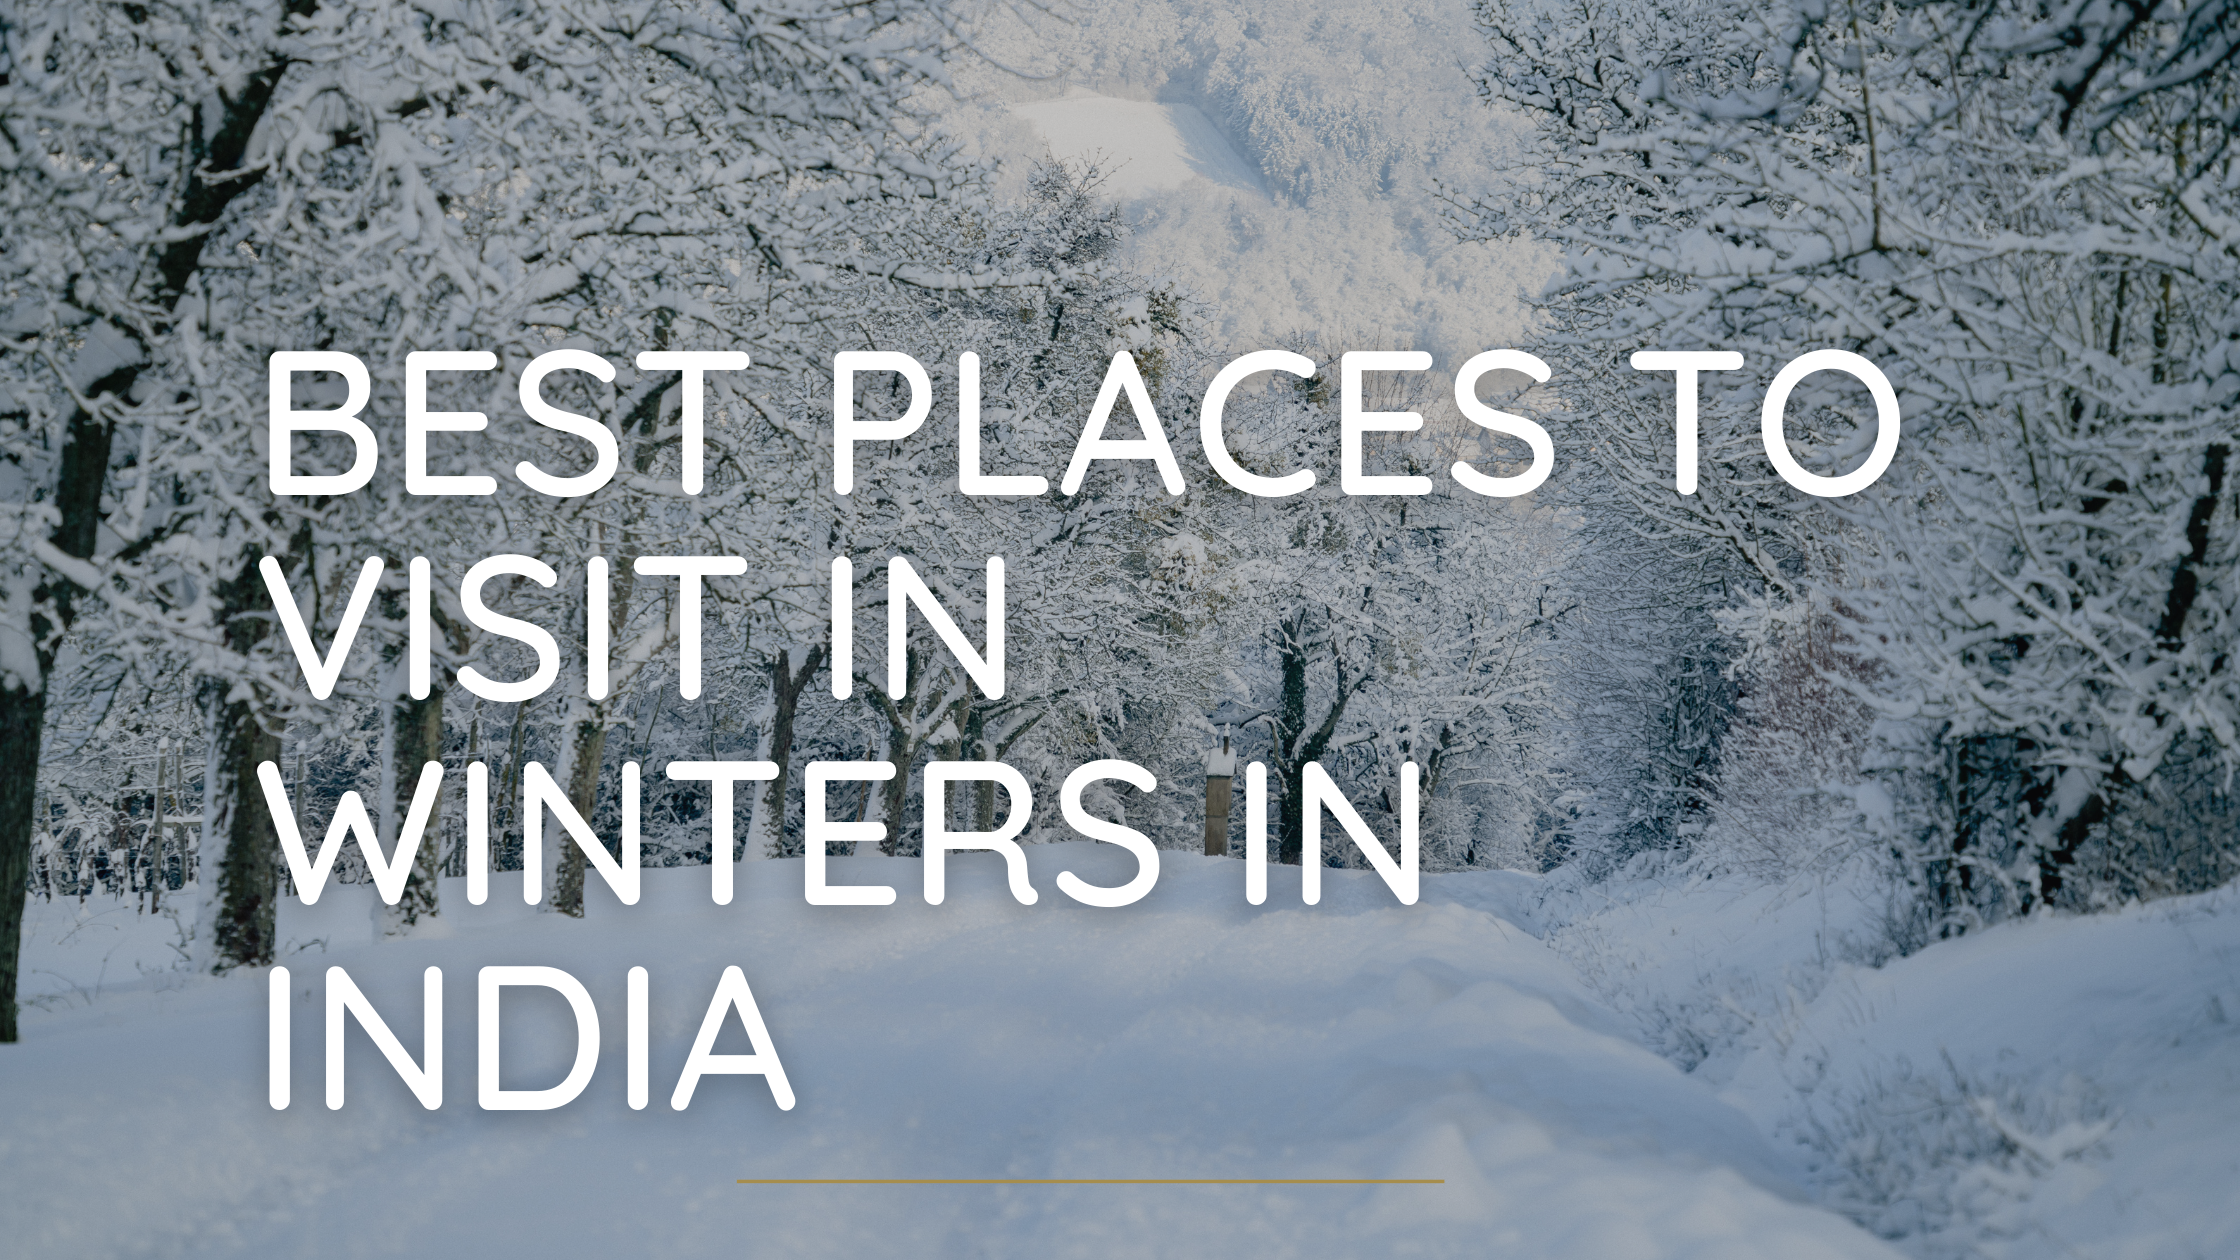 Best Places to visit during winter in India